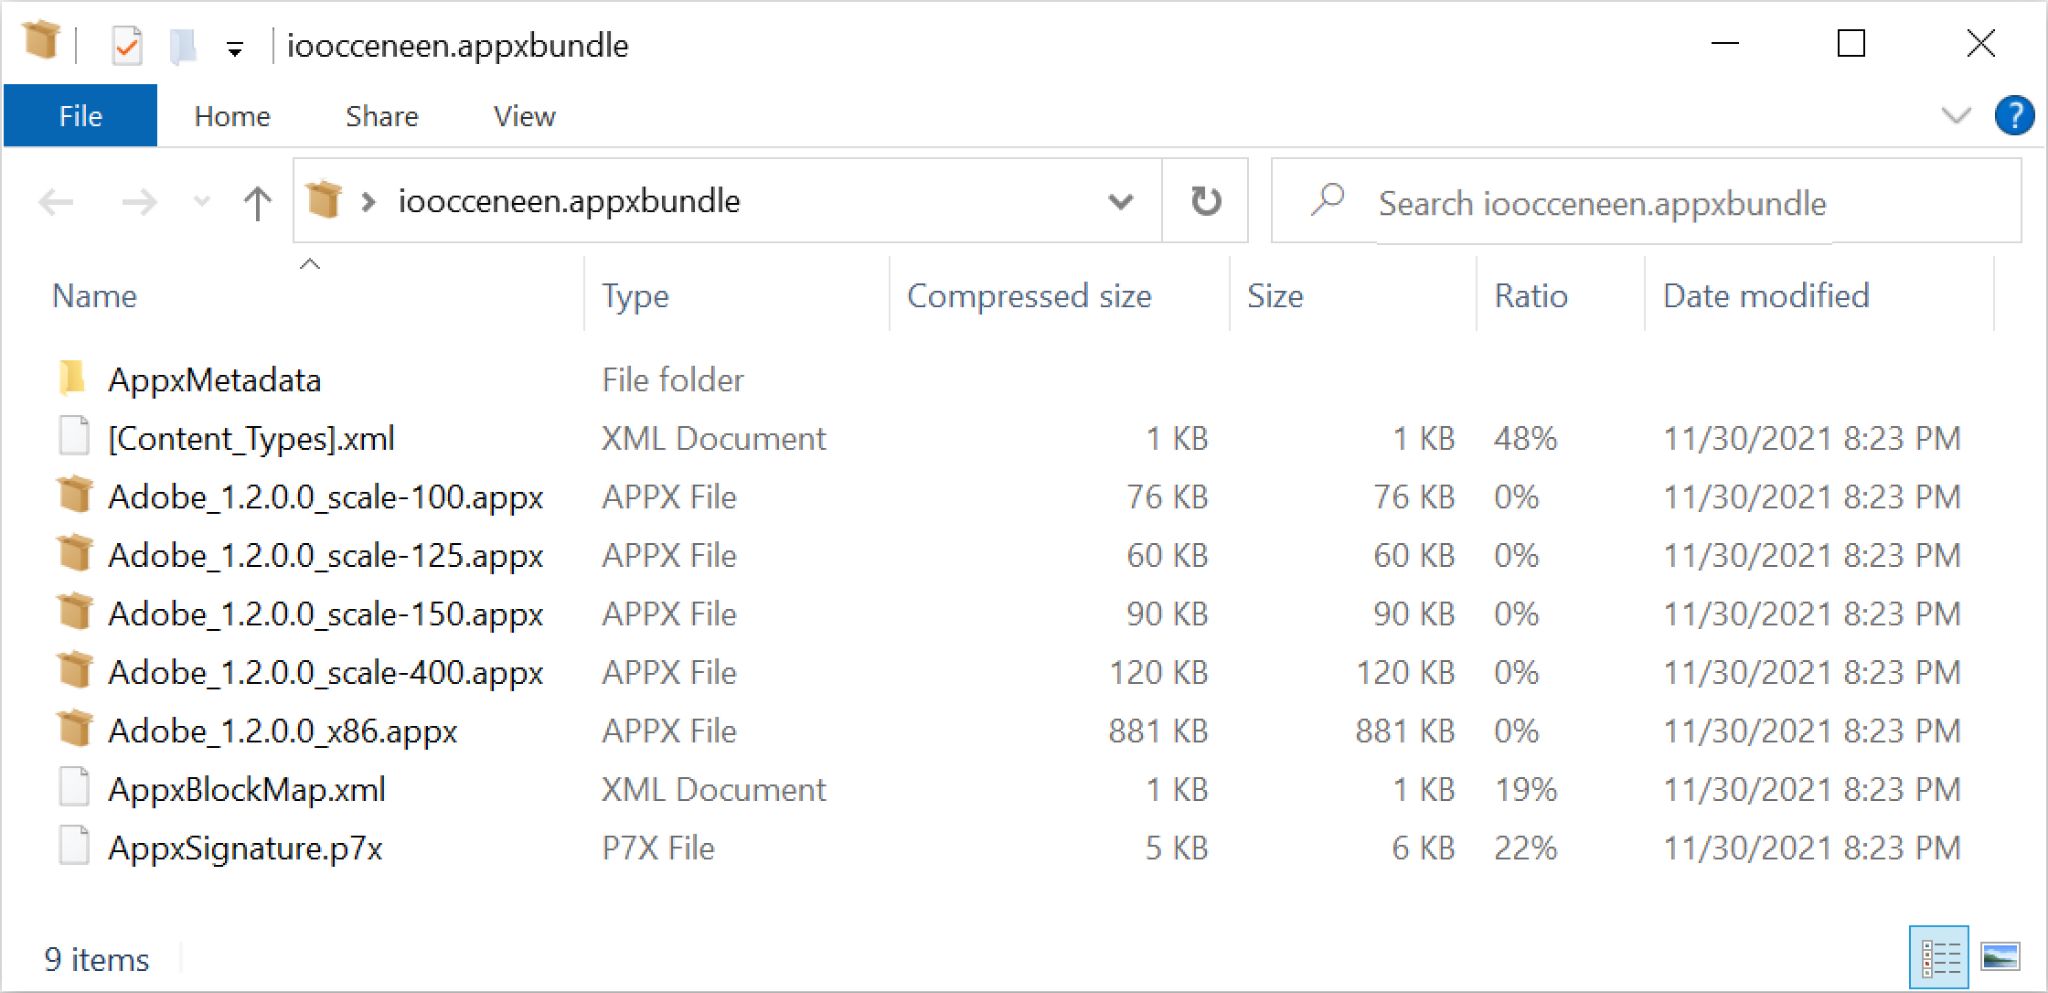 Contents of the malicious .appxbundle. It contains various files including ZIP archives with an .appx file extension. The entire .appxbundle is designed to retrieve an Emotet DLL and run it on a vulnerable Windows host. 